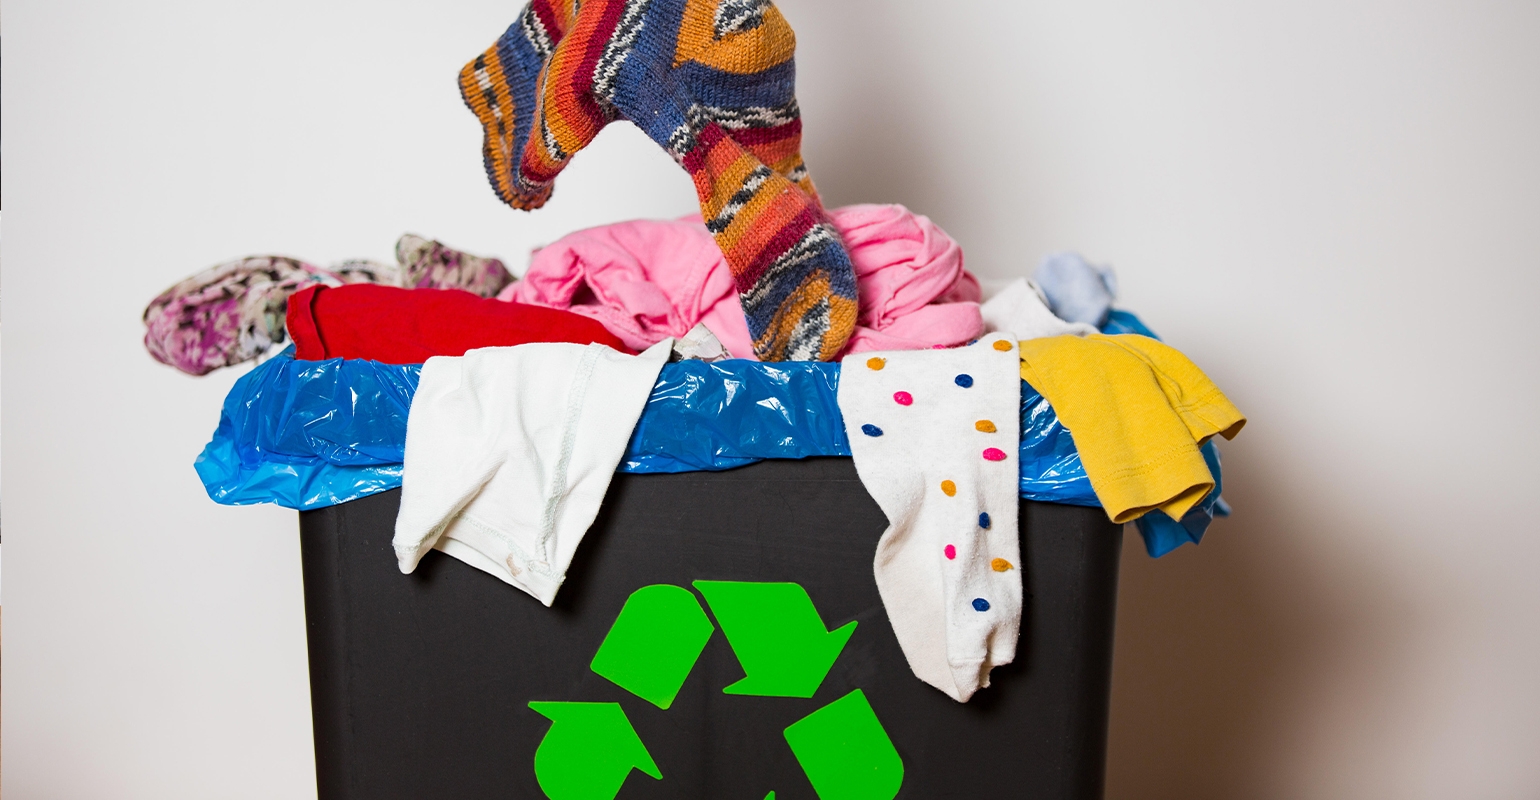 Top Ten Cities for Clothing Recycling in the United States